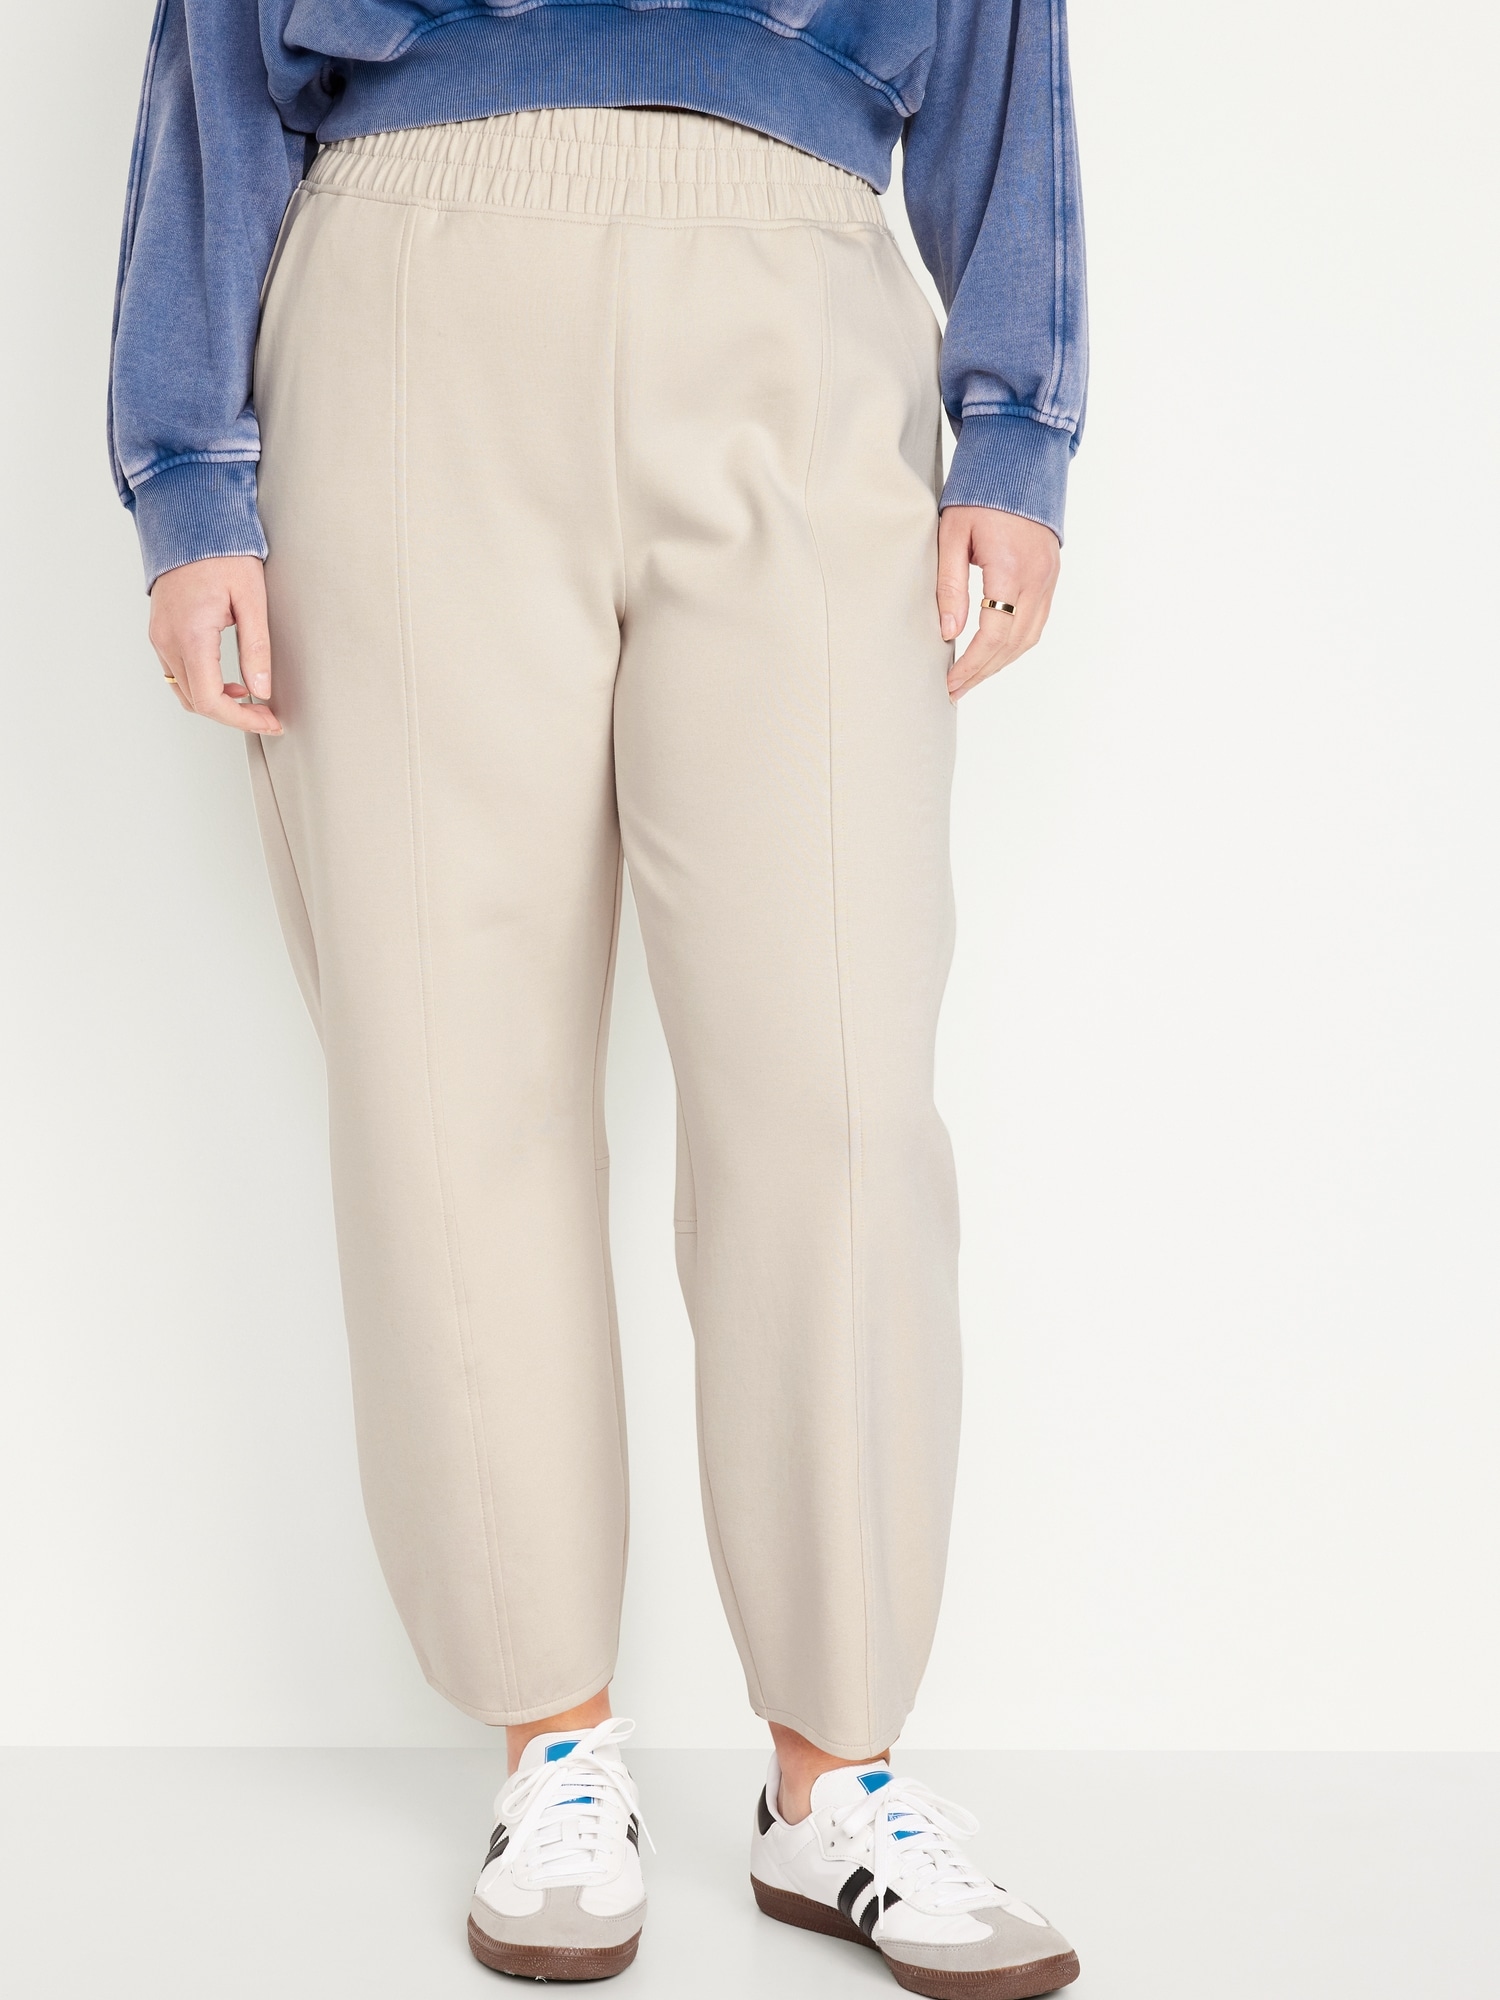 Brown Trousers - Tapered Trousers - Office Chic Trousers - Lulus